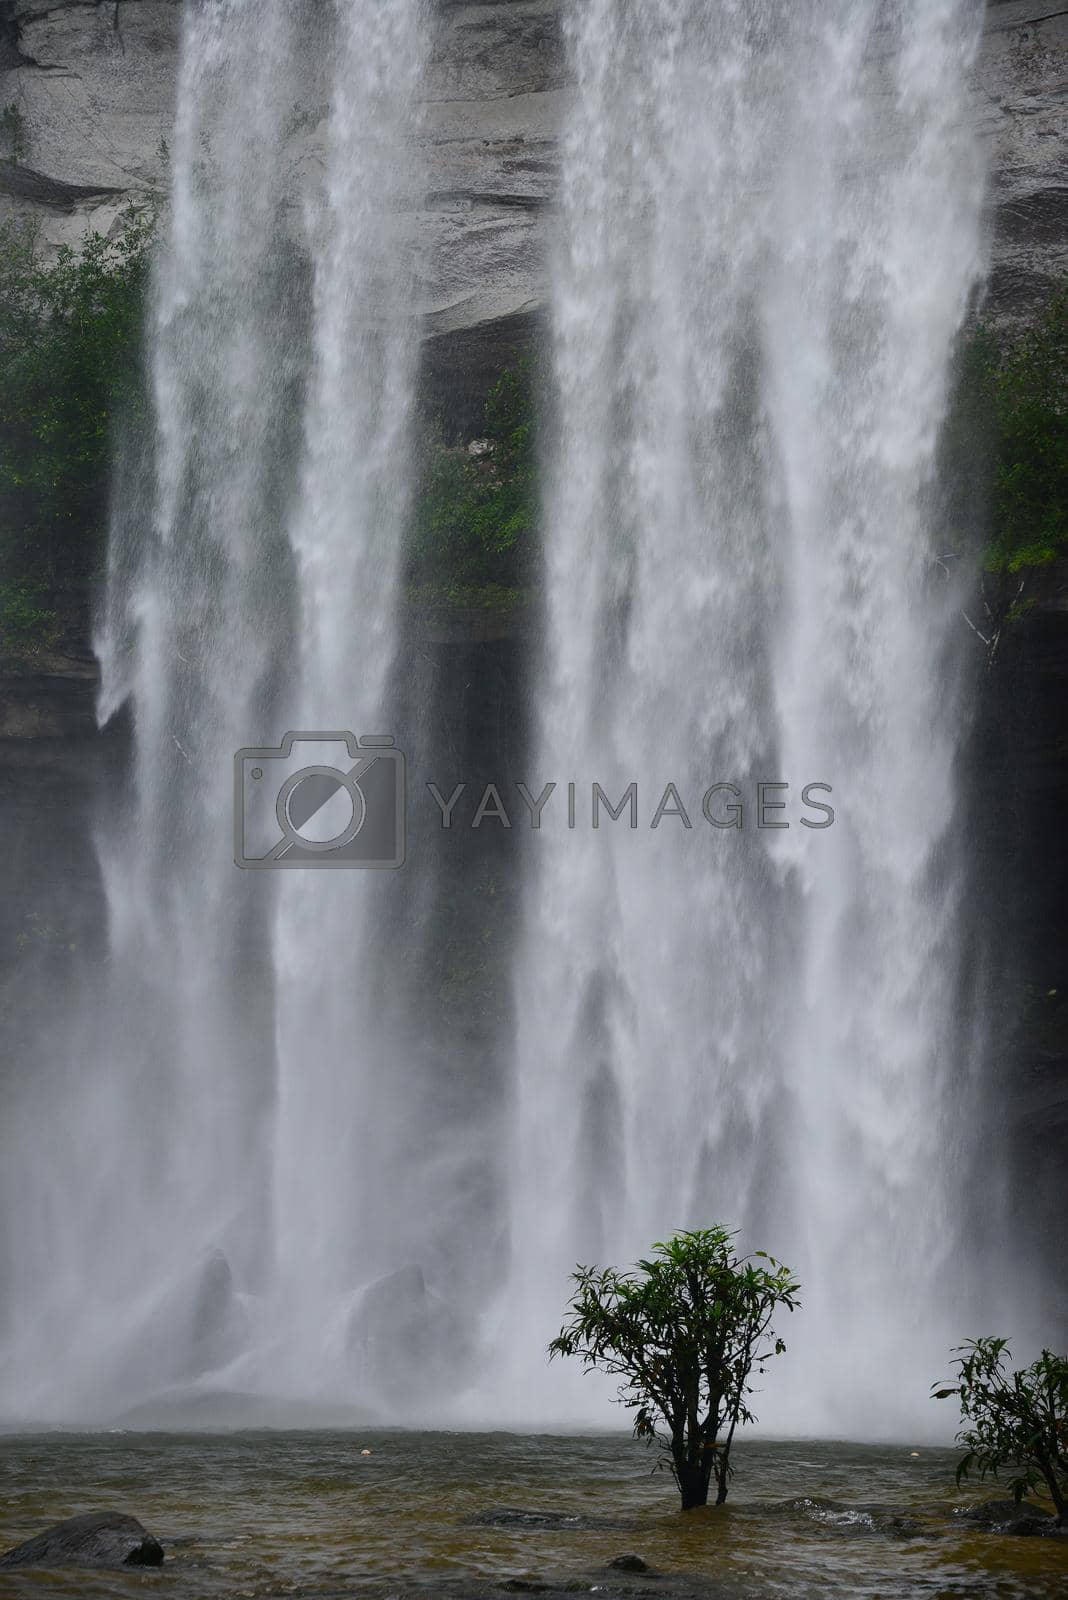 Royalty free image of Big Waterfall in Thailand by porbital